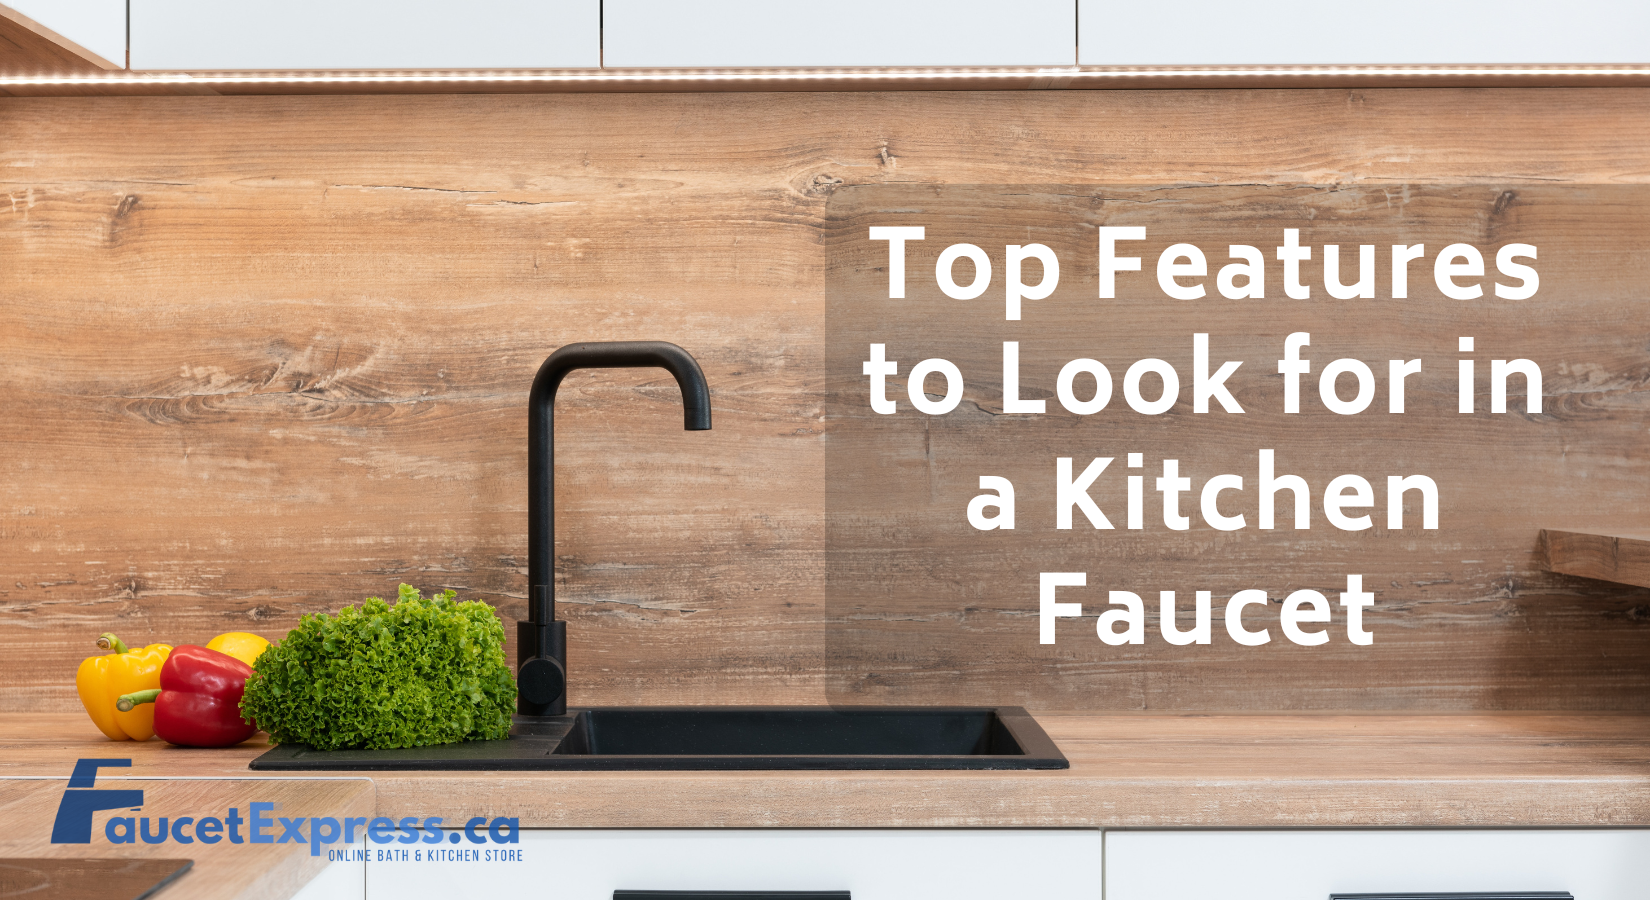 Top Features to Look for in a Kitchen Faucet